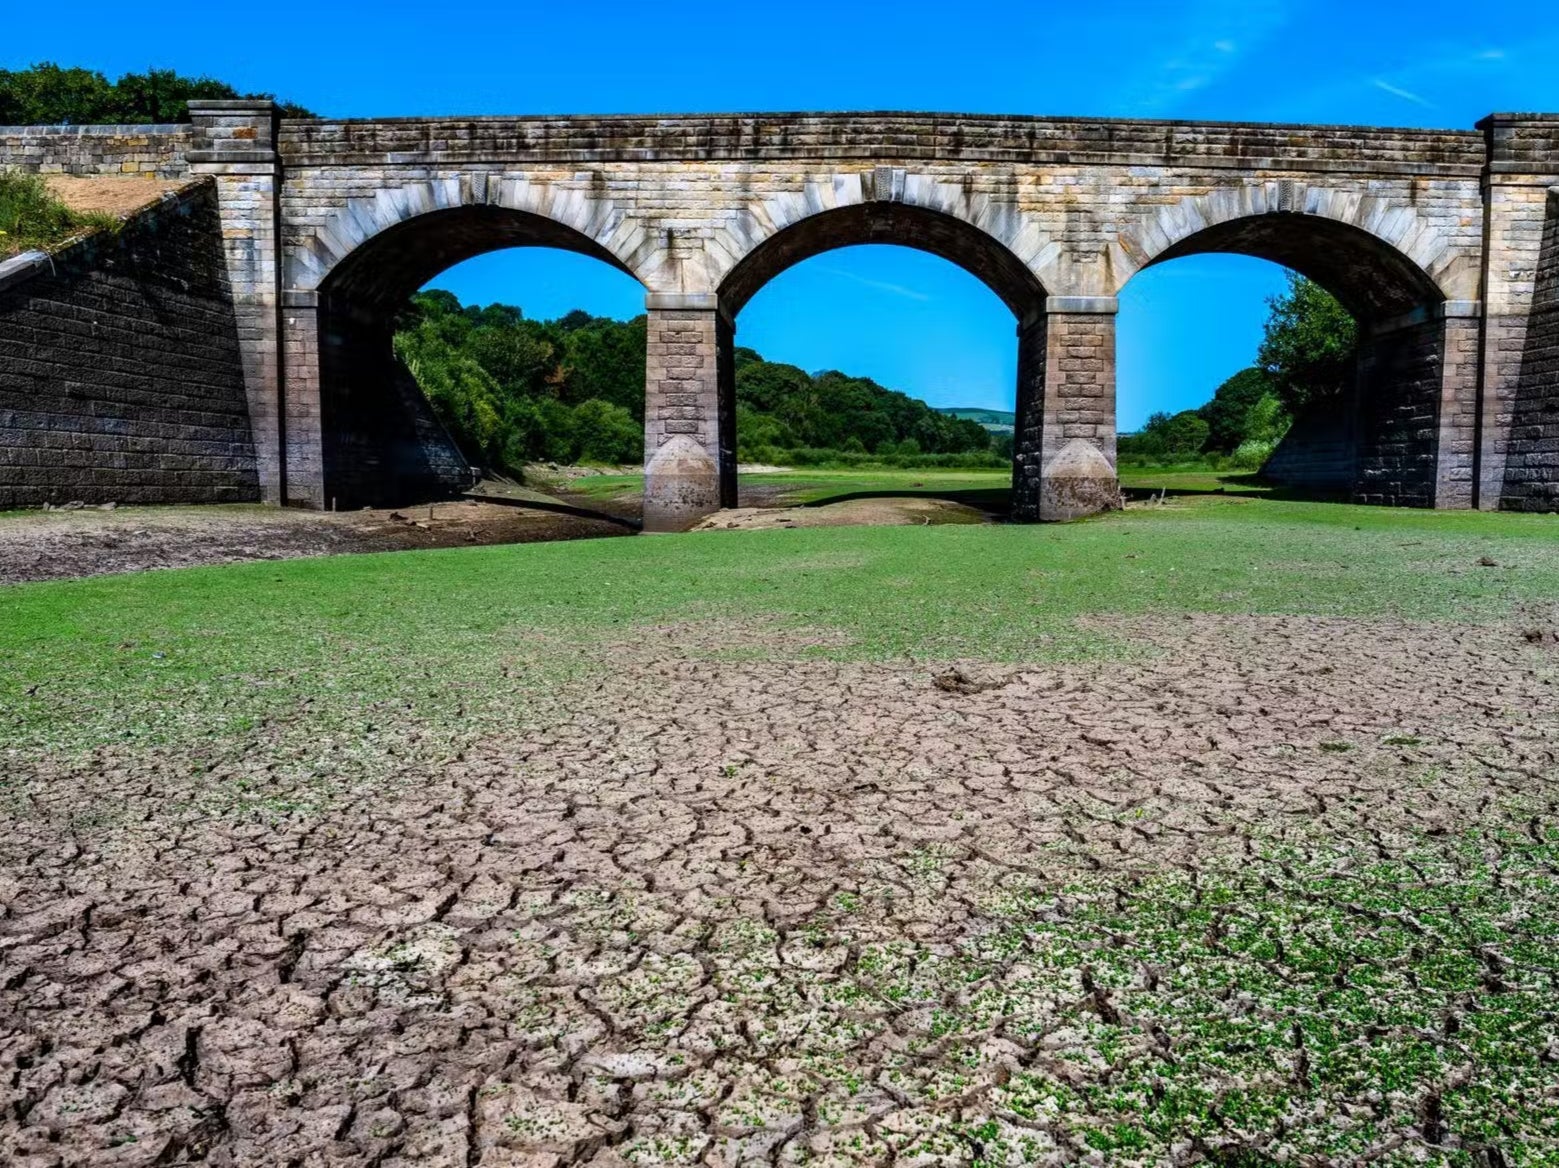 Lindley Wood Reservoir is on the verge of drying up completely